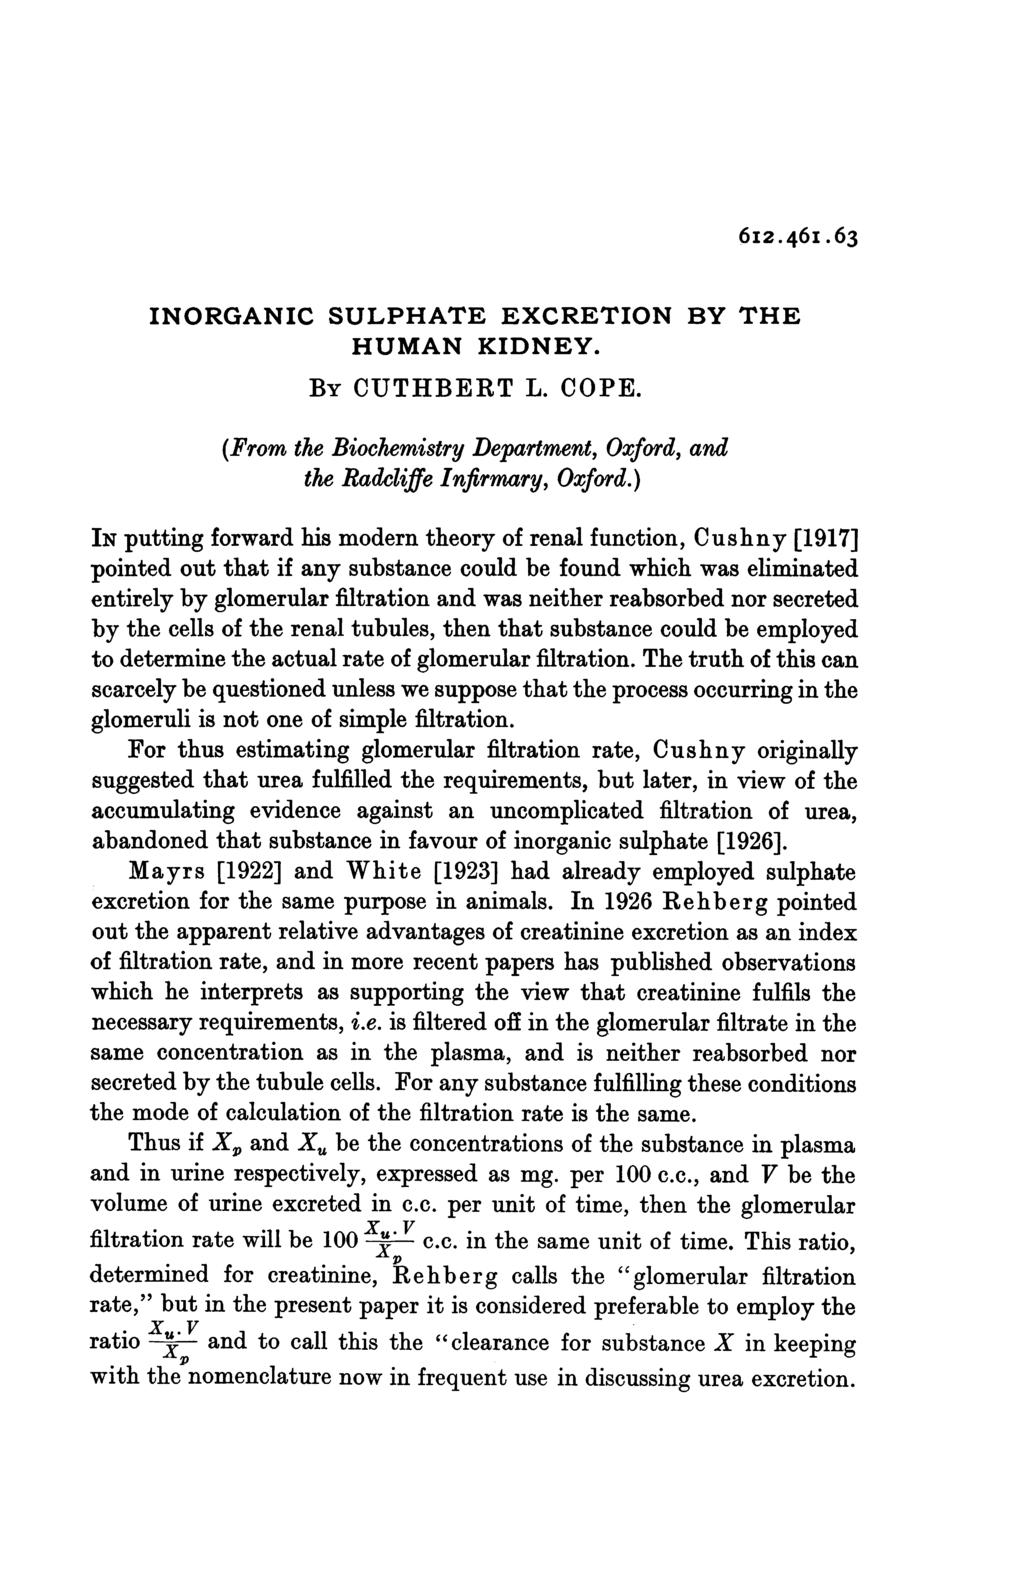 6I2.46I.63 INORGANIC SULPHATE EXCRETION BY THE HUMAN KIDNEY. BY CUTHBERT L. COPE. (From the Biochemistry Department, Oxford, and the Radcliffe Infirmary, Oxford.